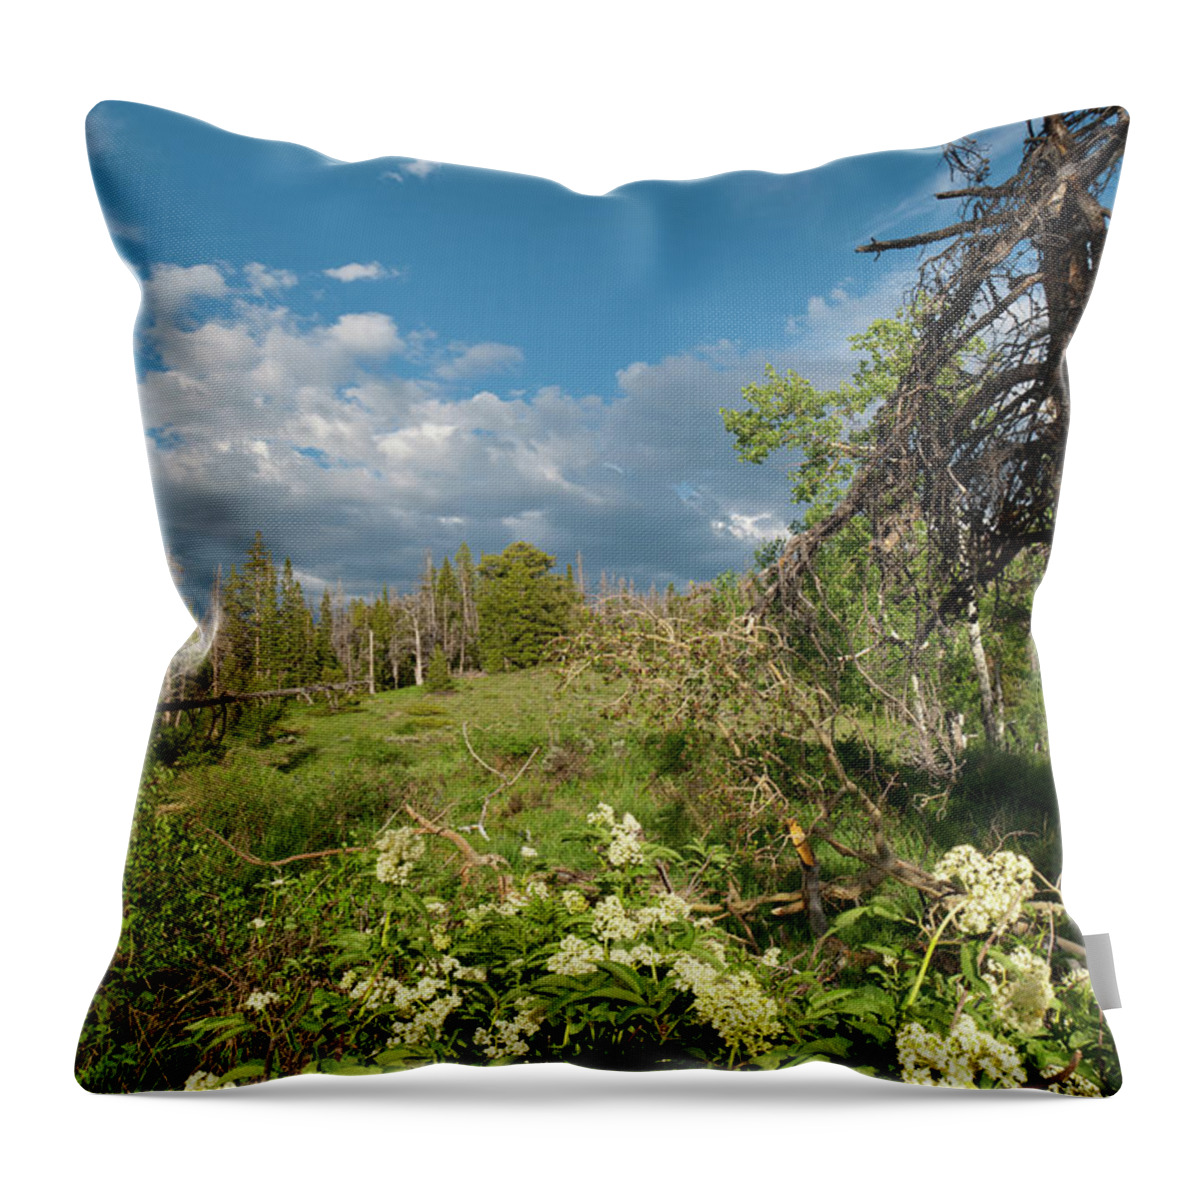 Ute Peak Throw Pillow featuring the photograph Evening Landscape on the Slopes of Ute Peak by Cascade Colors